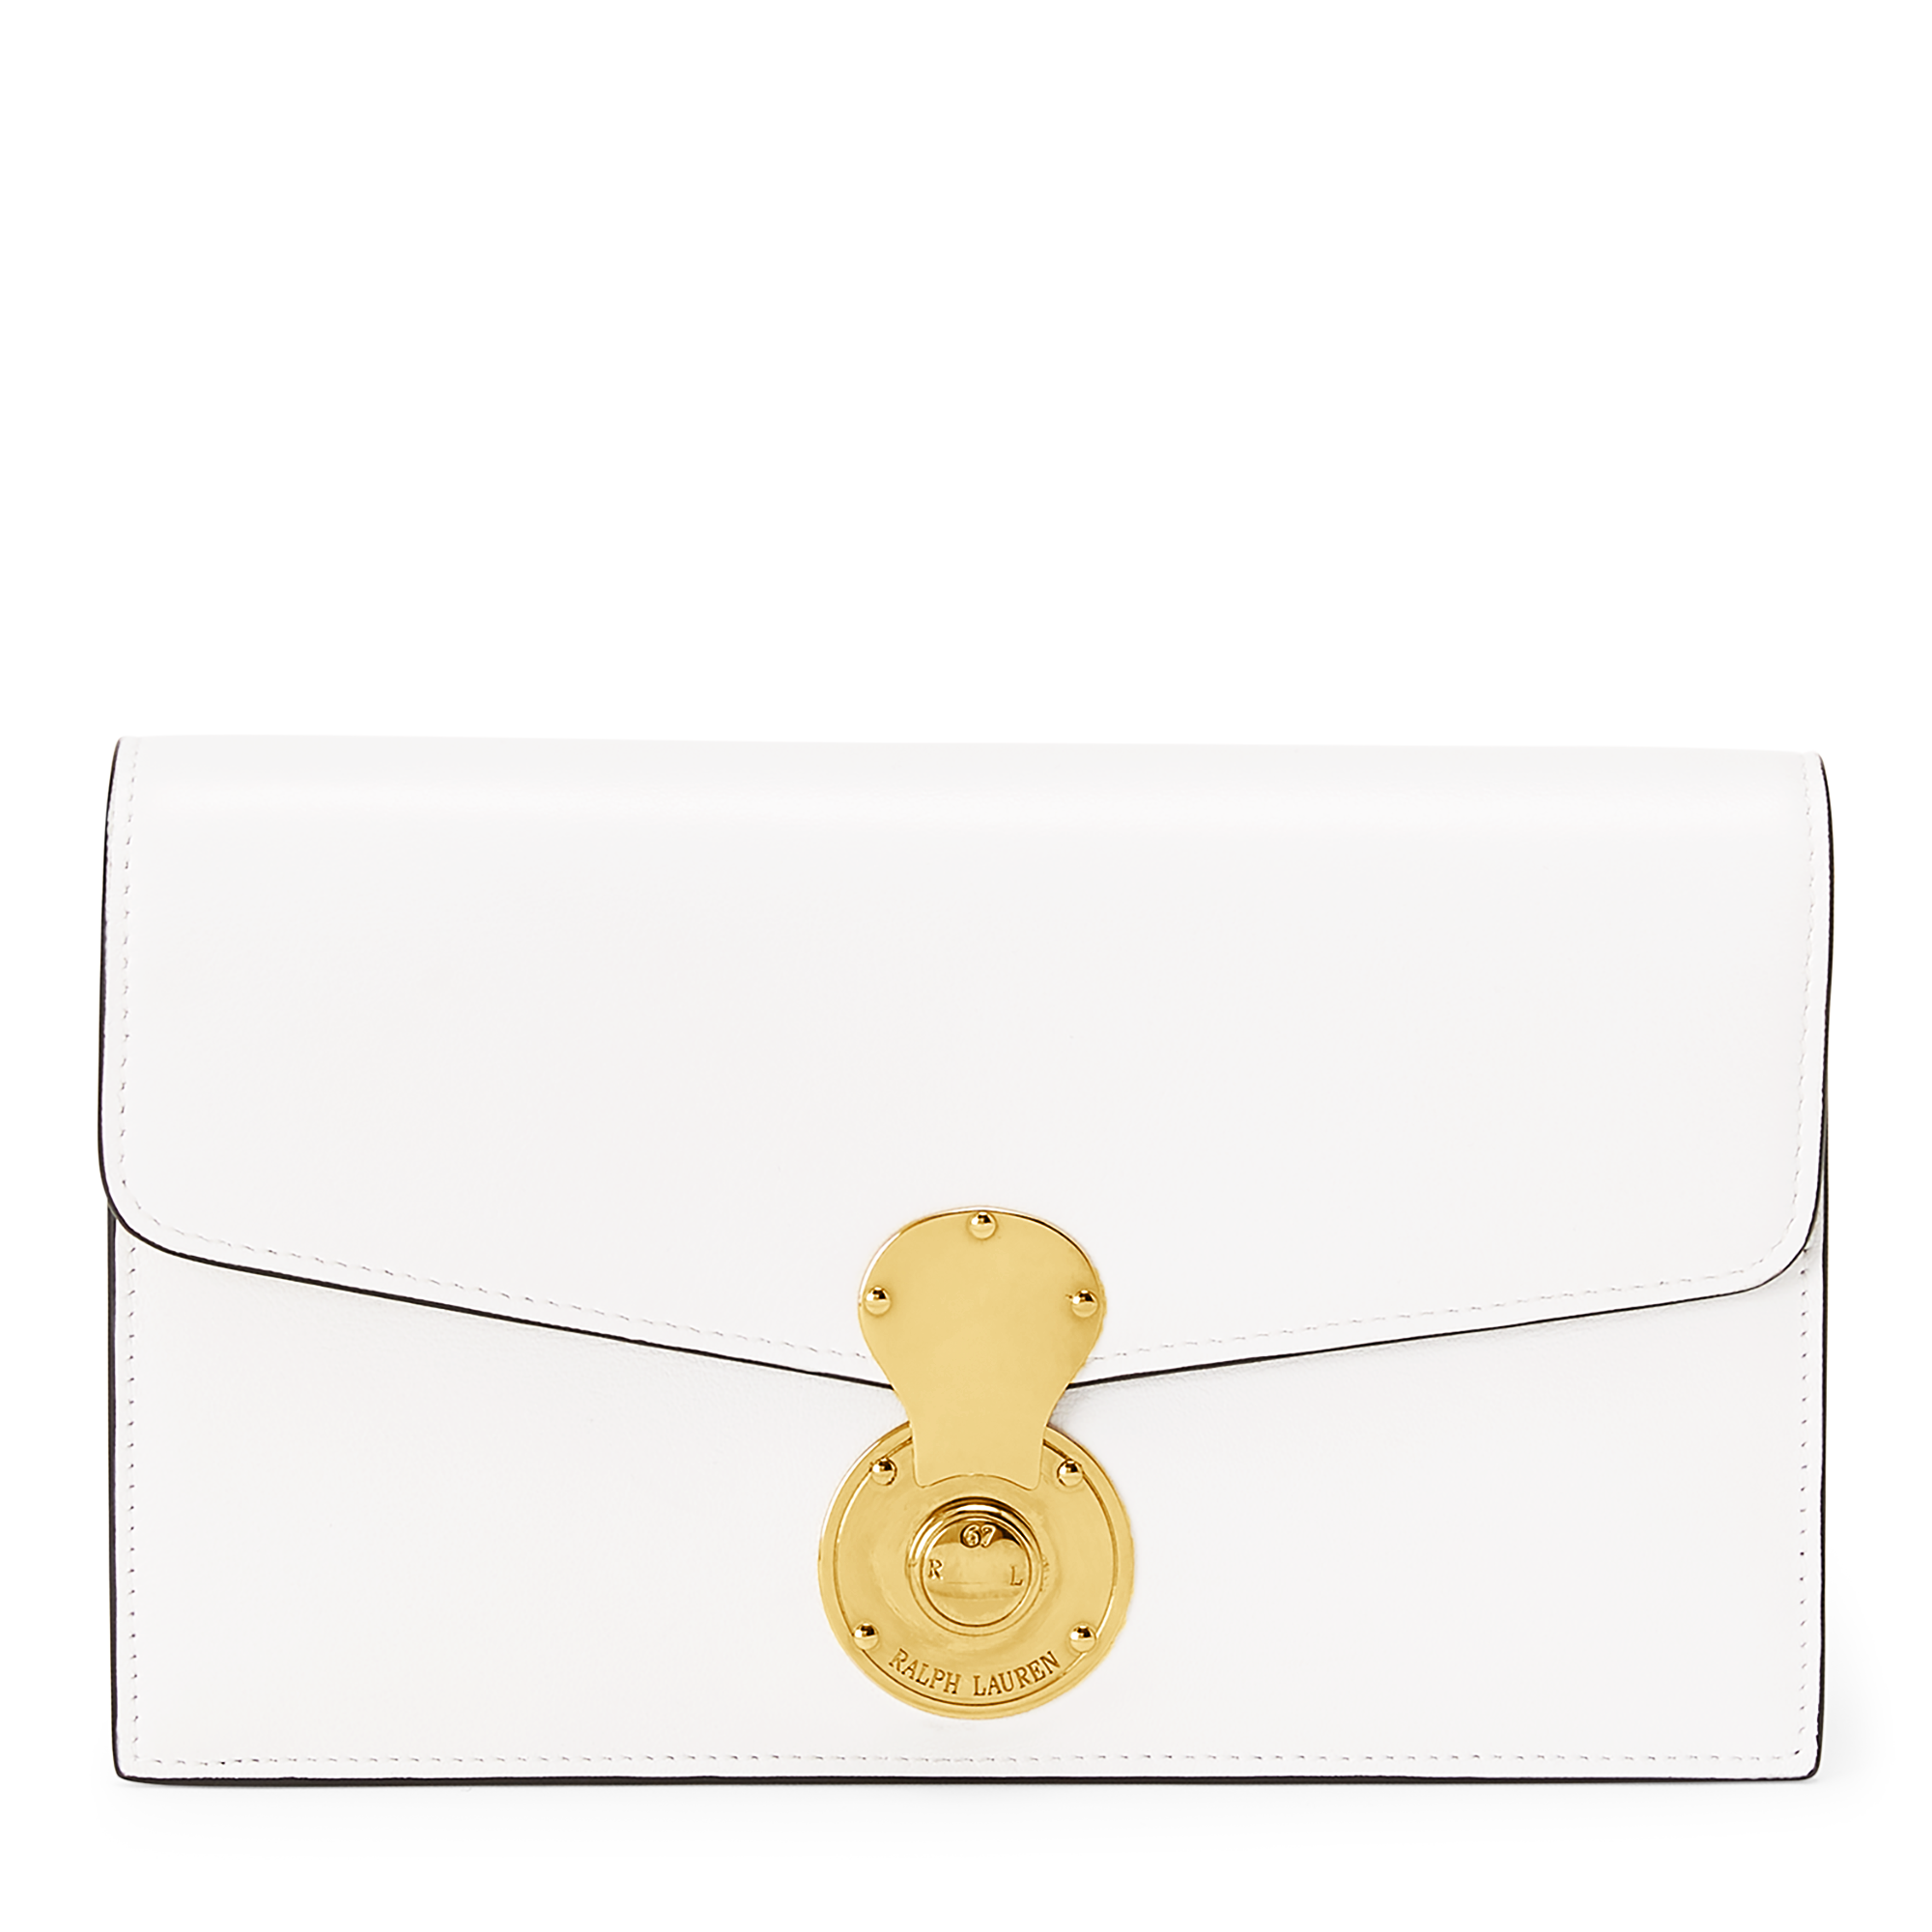 Ricky Calfskin Chain Wallet by Ralph Lauren, available on ralphlauren.com for $995 Meghan Markle Bags Exact Product 